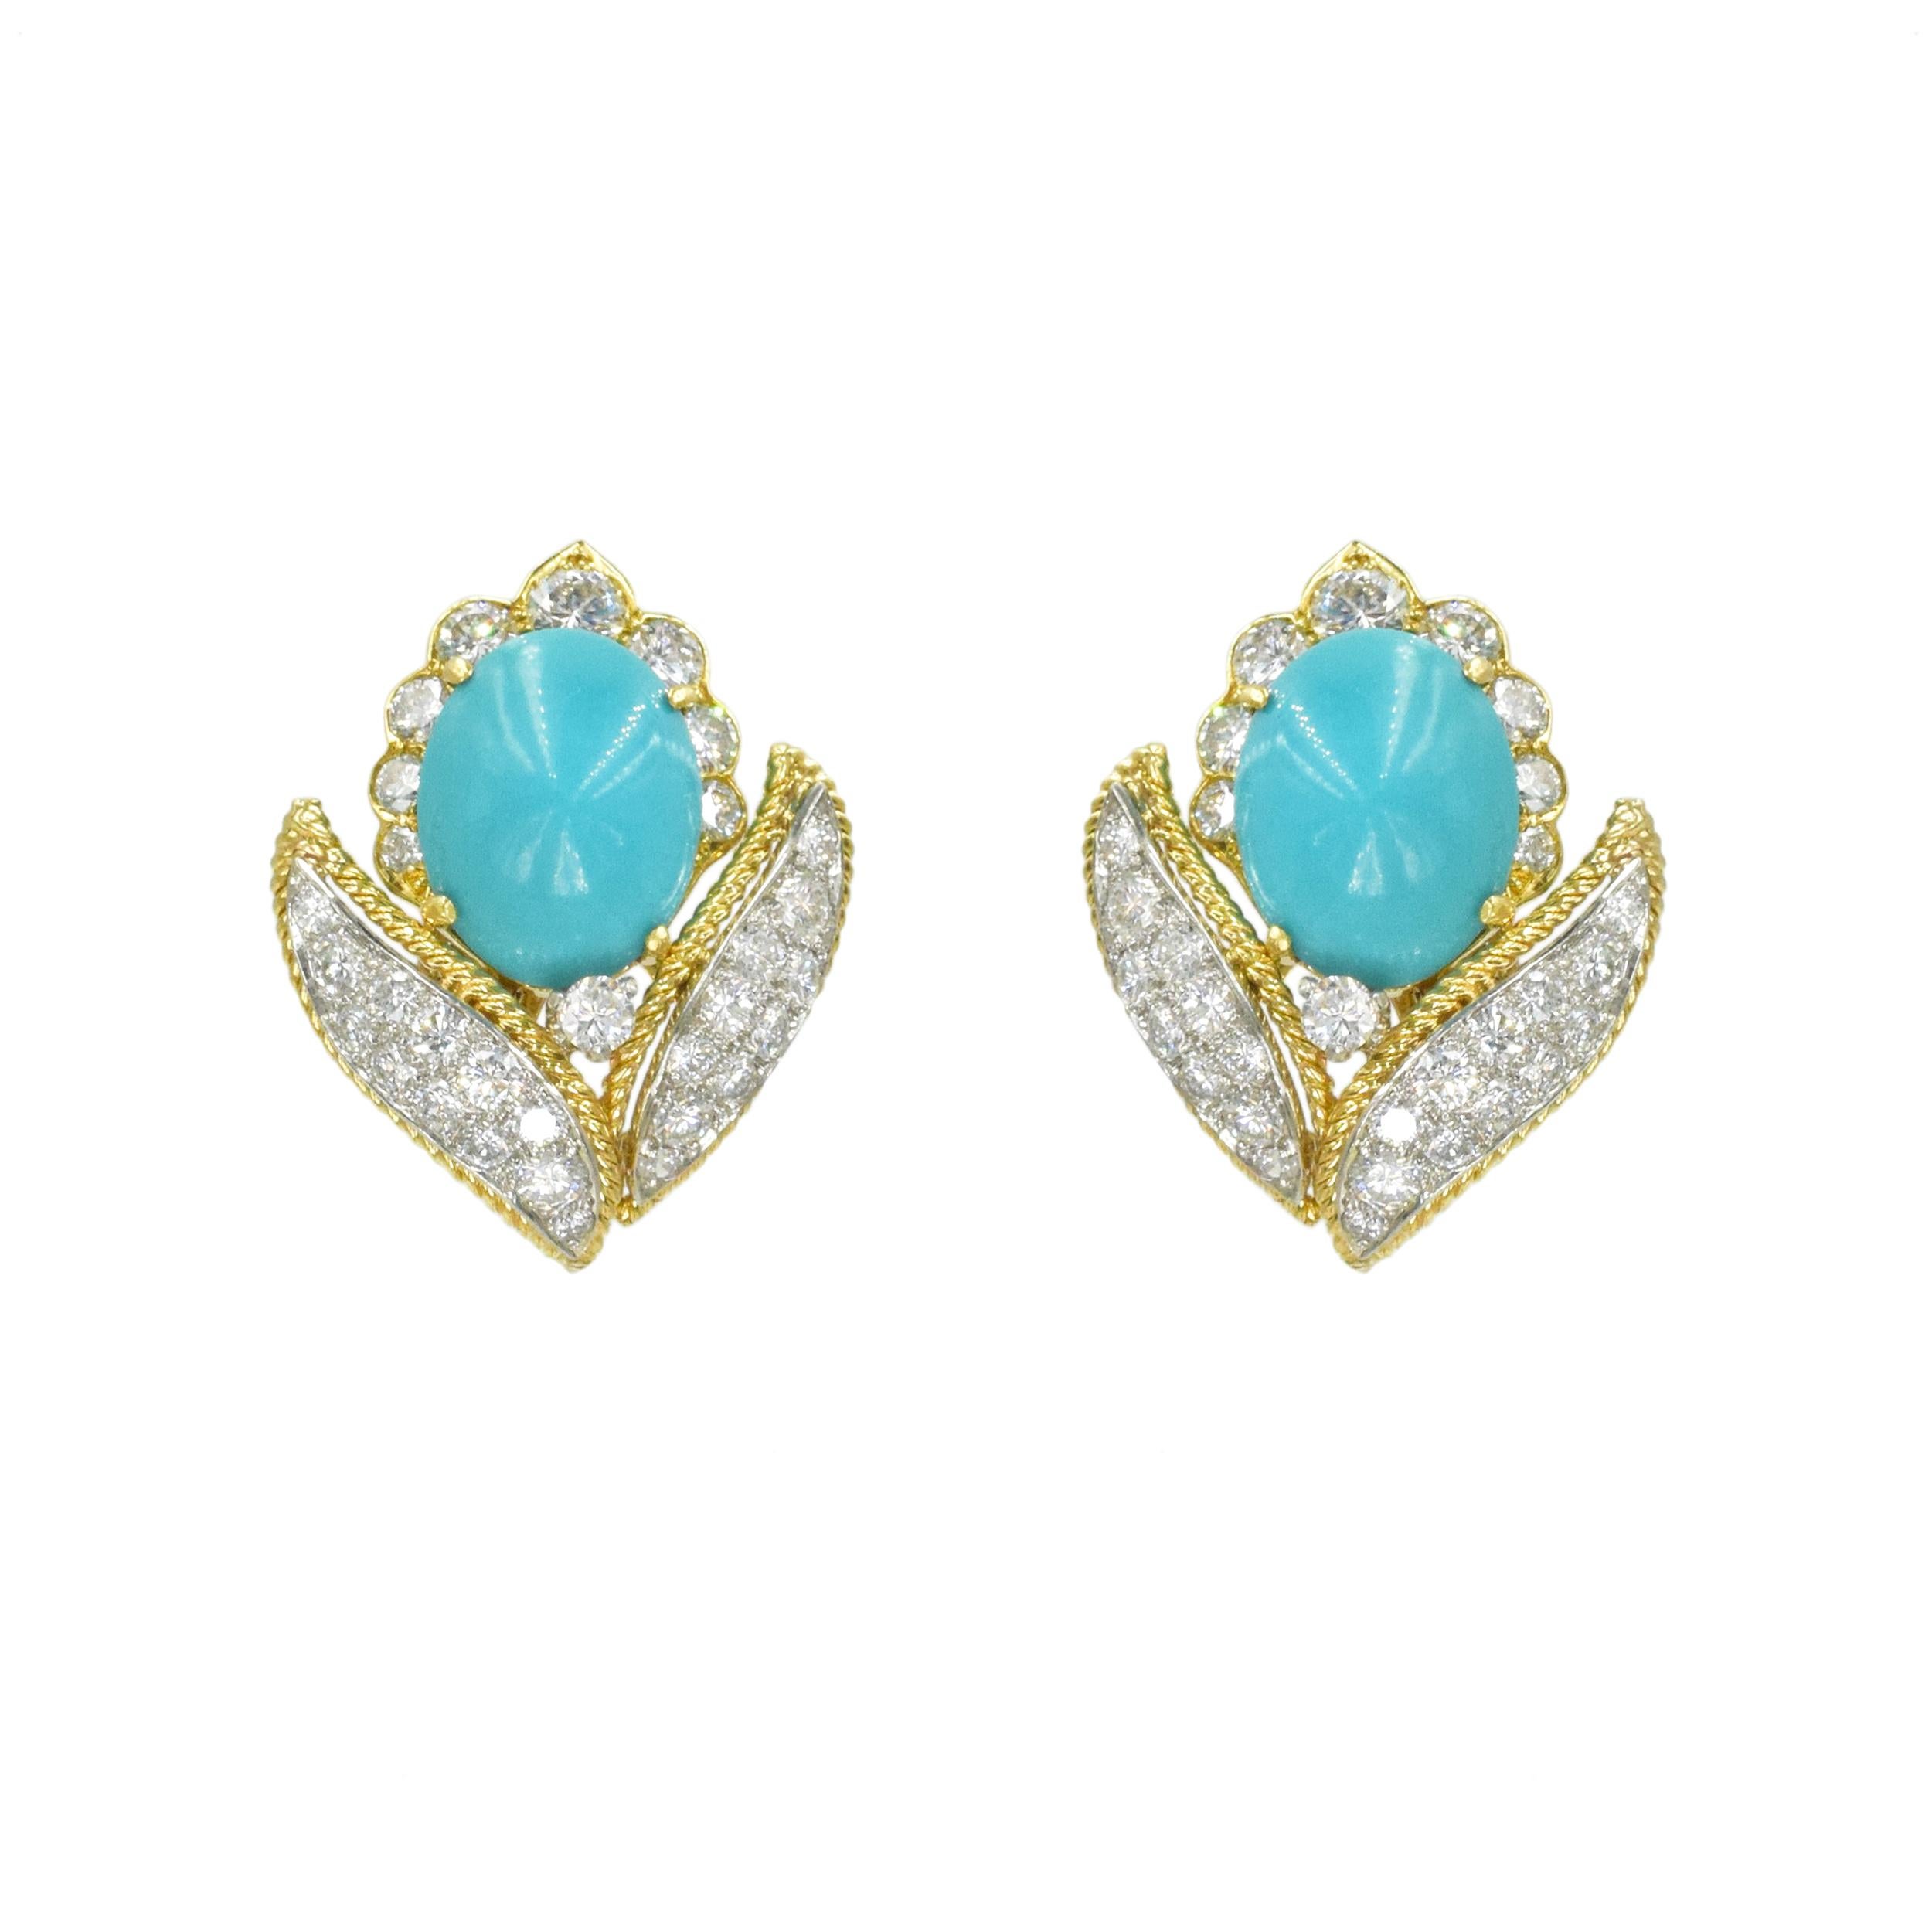 VCA Turquoise and Diamond Earrings Mounted In 18k Yellow Gold And White Gold. Circa 1965. These earclips consist of two oval turquiose cabachos (13mm x 10mm), accented with leaf motif, encrusted with 62 round brilliant cut diamonds with total weight